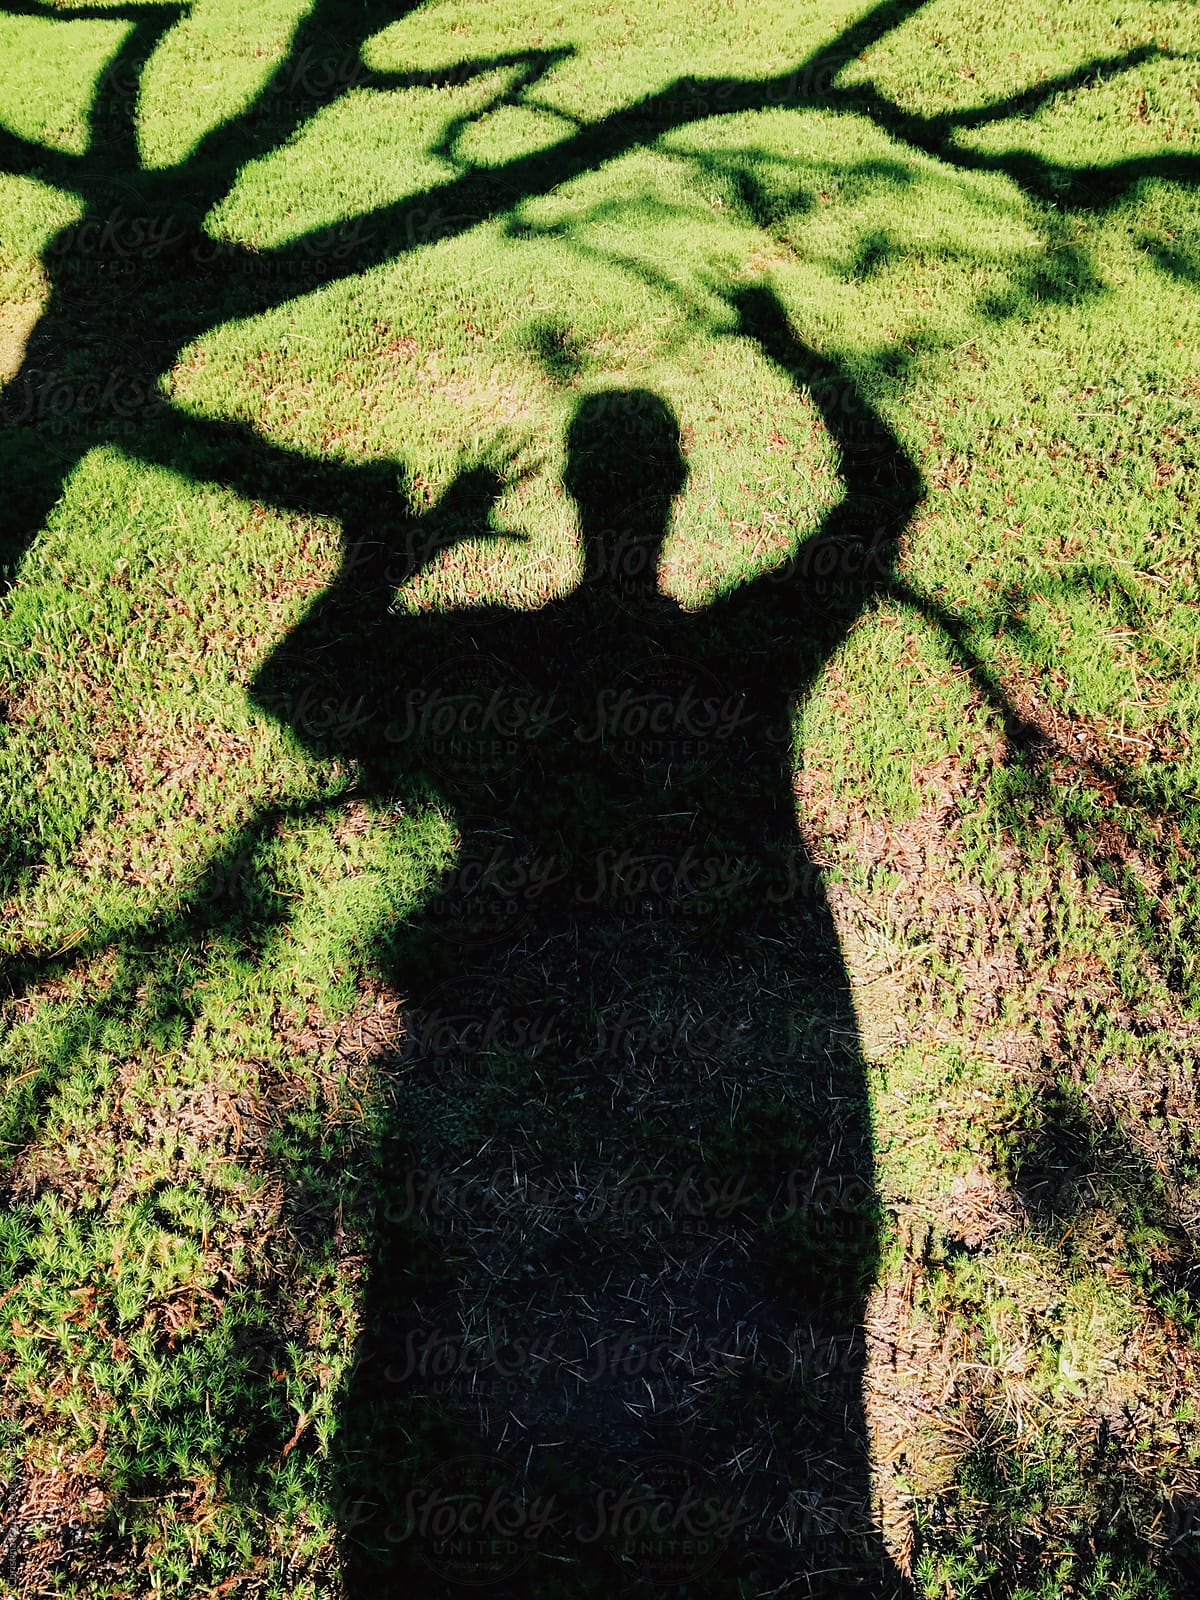 The shadow of a man with his arms raised mimics the shadows made by the tree branches